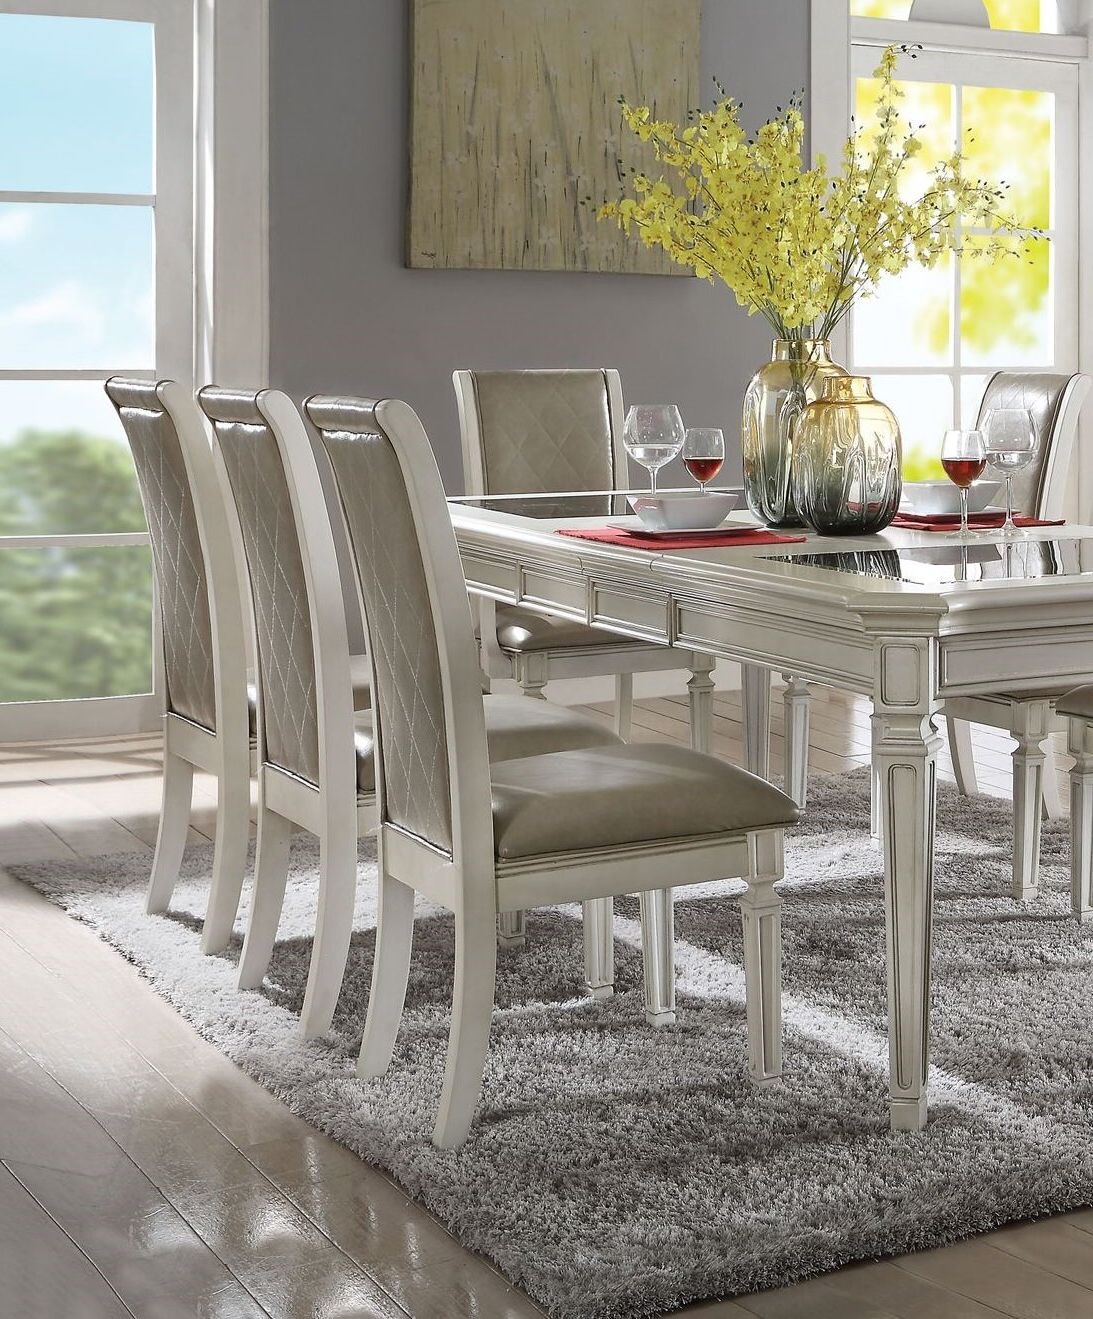 Fashionable Lamotte Upholstered Dining Chair For Lamotte 5 Piece Dining Sets (View 10 of 20)